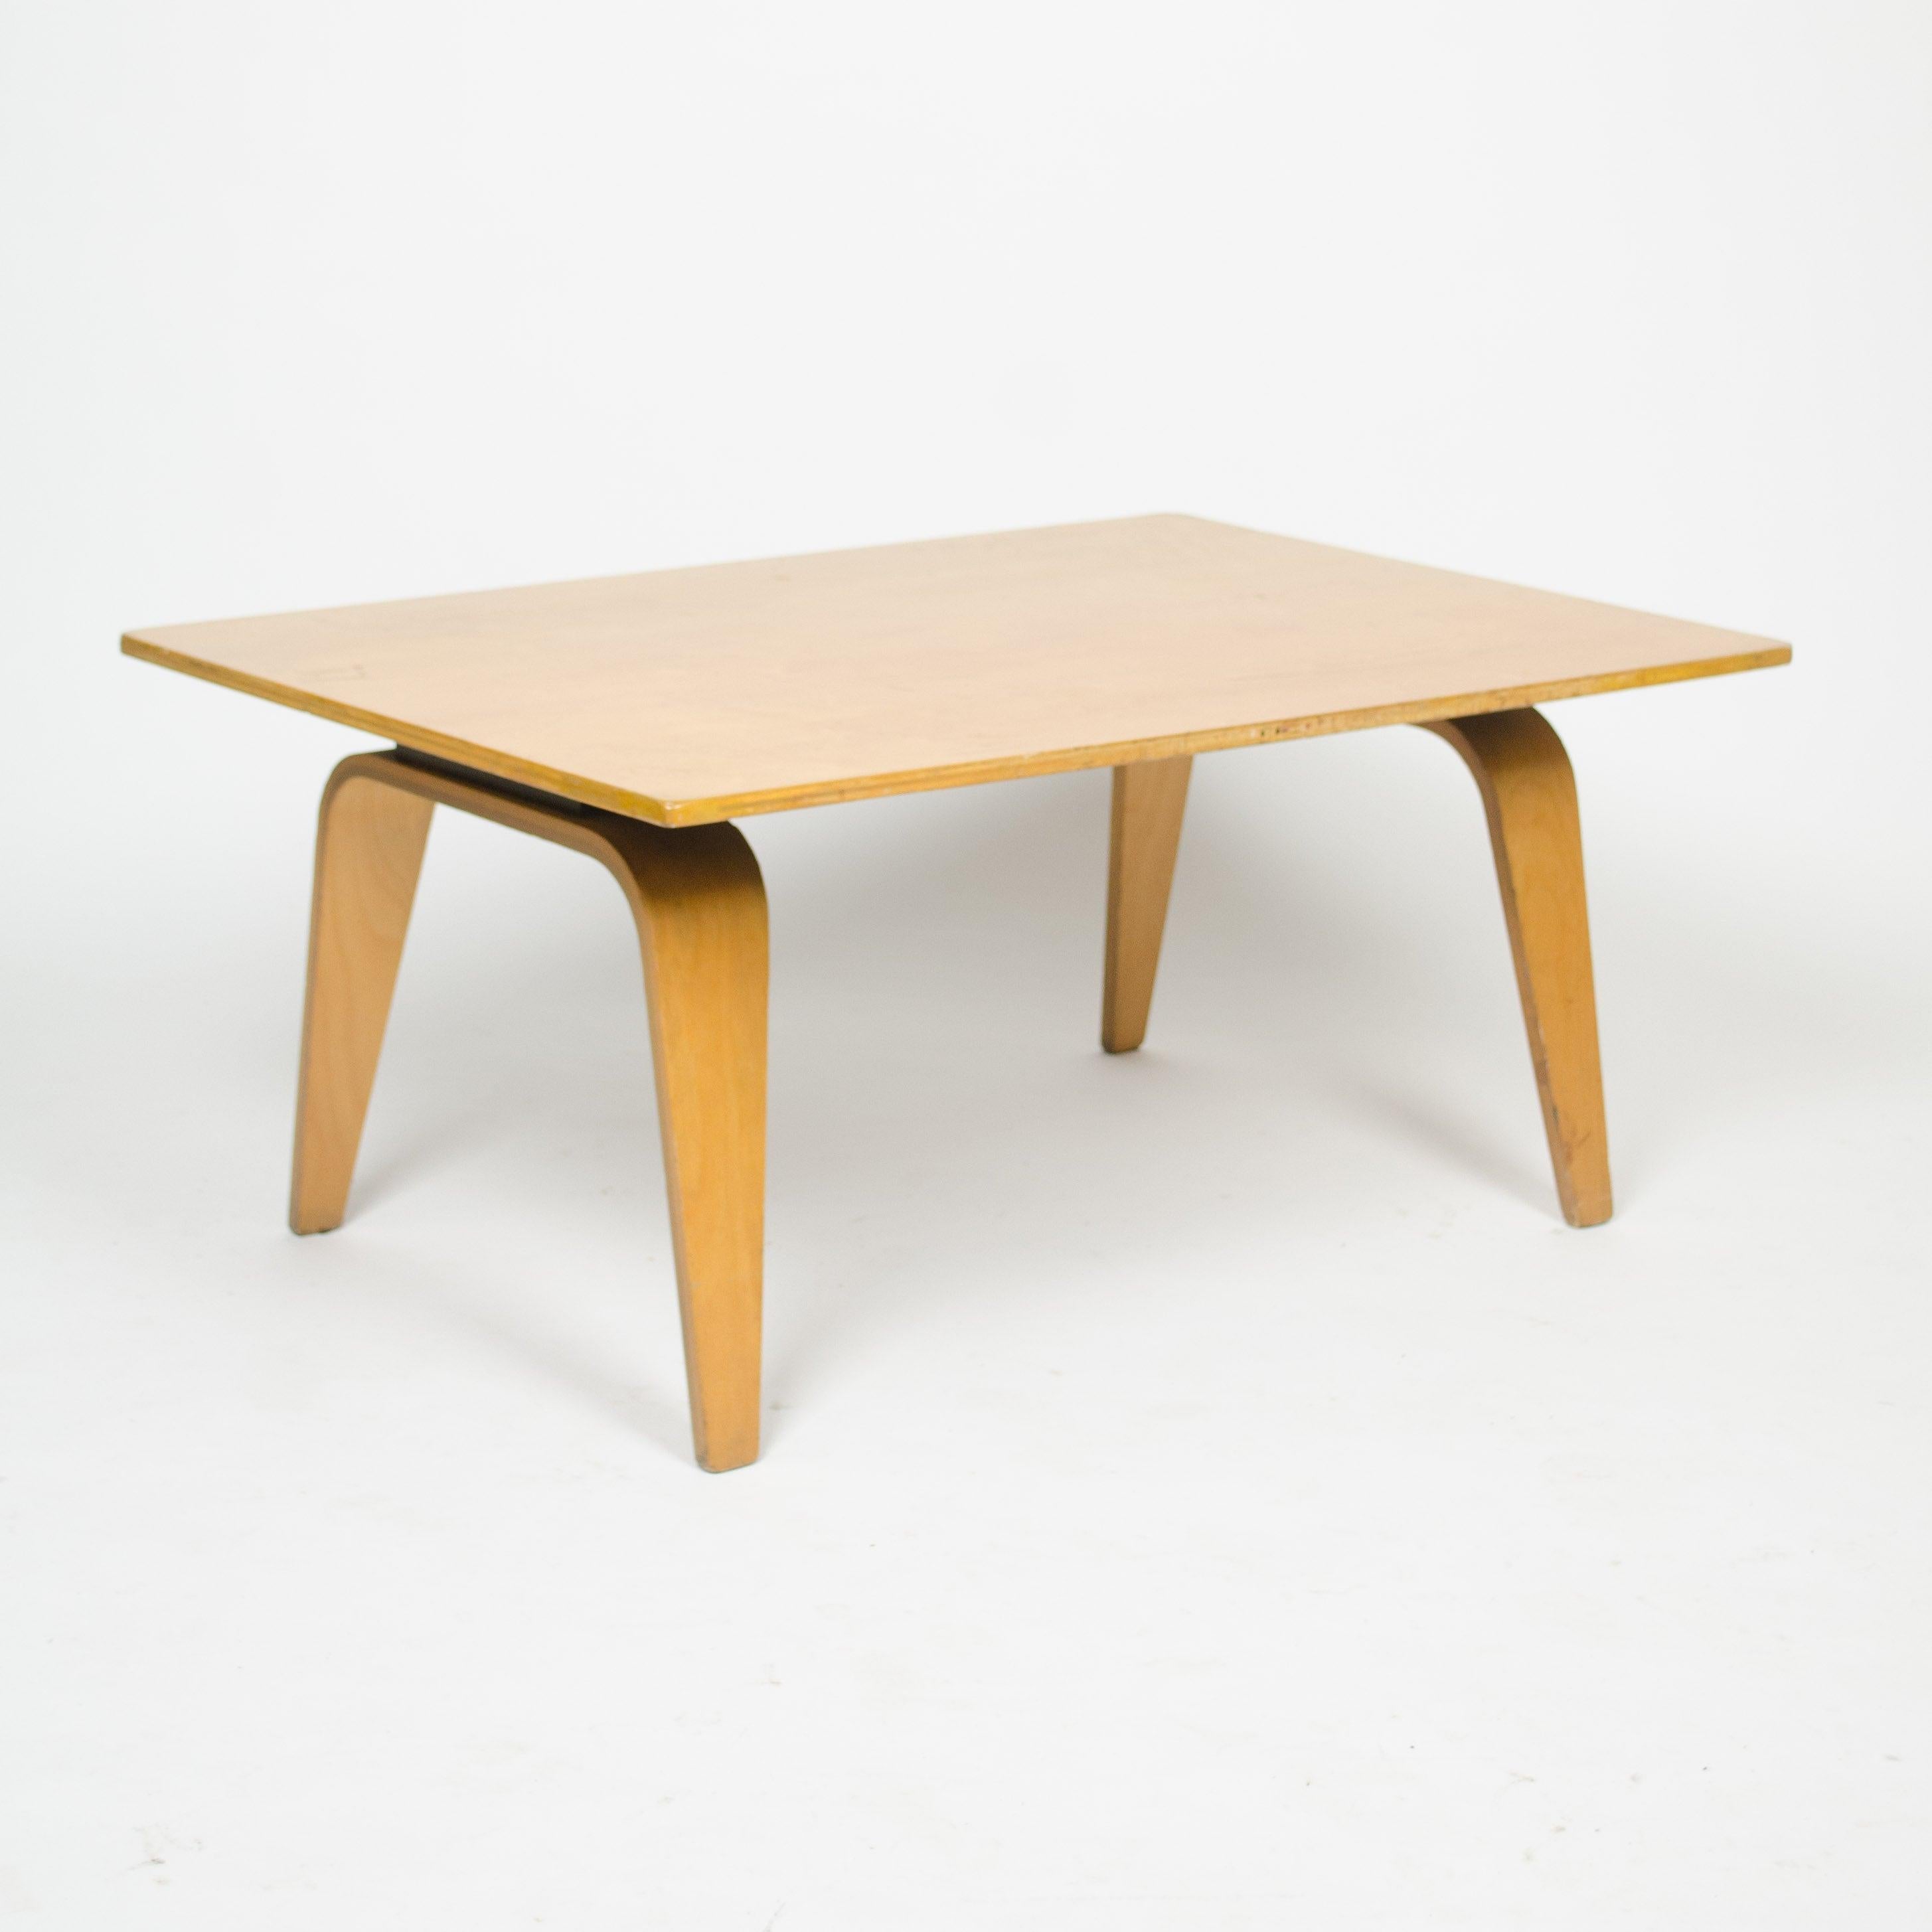 Listed for sale is an original maple Eames OTW coffee table, produced by Evans approx. 1946. This particular example is all original. The table has been well cared for and shows some wear as noted in photos.

These tables are tremendously rare,